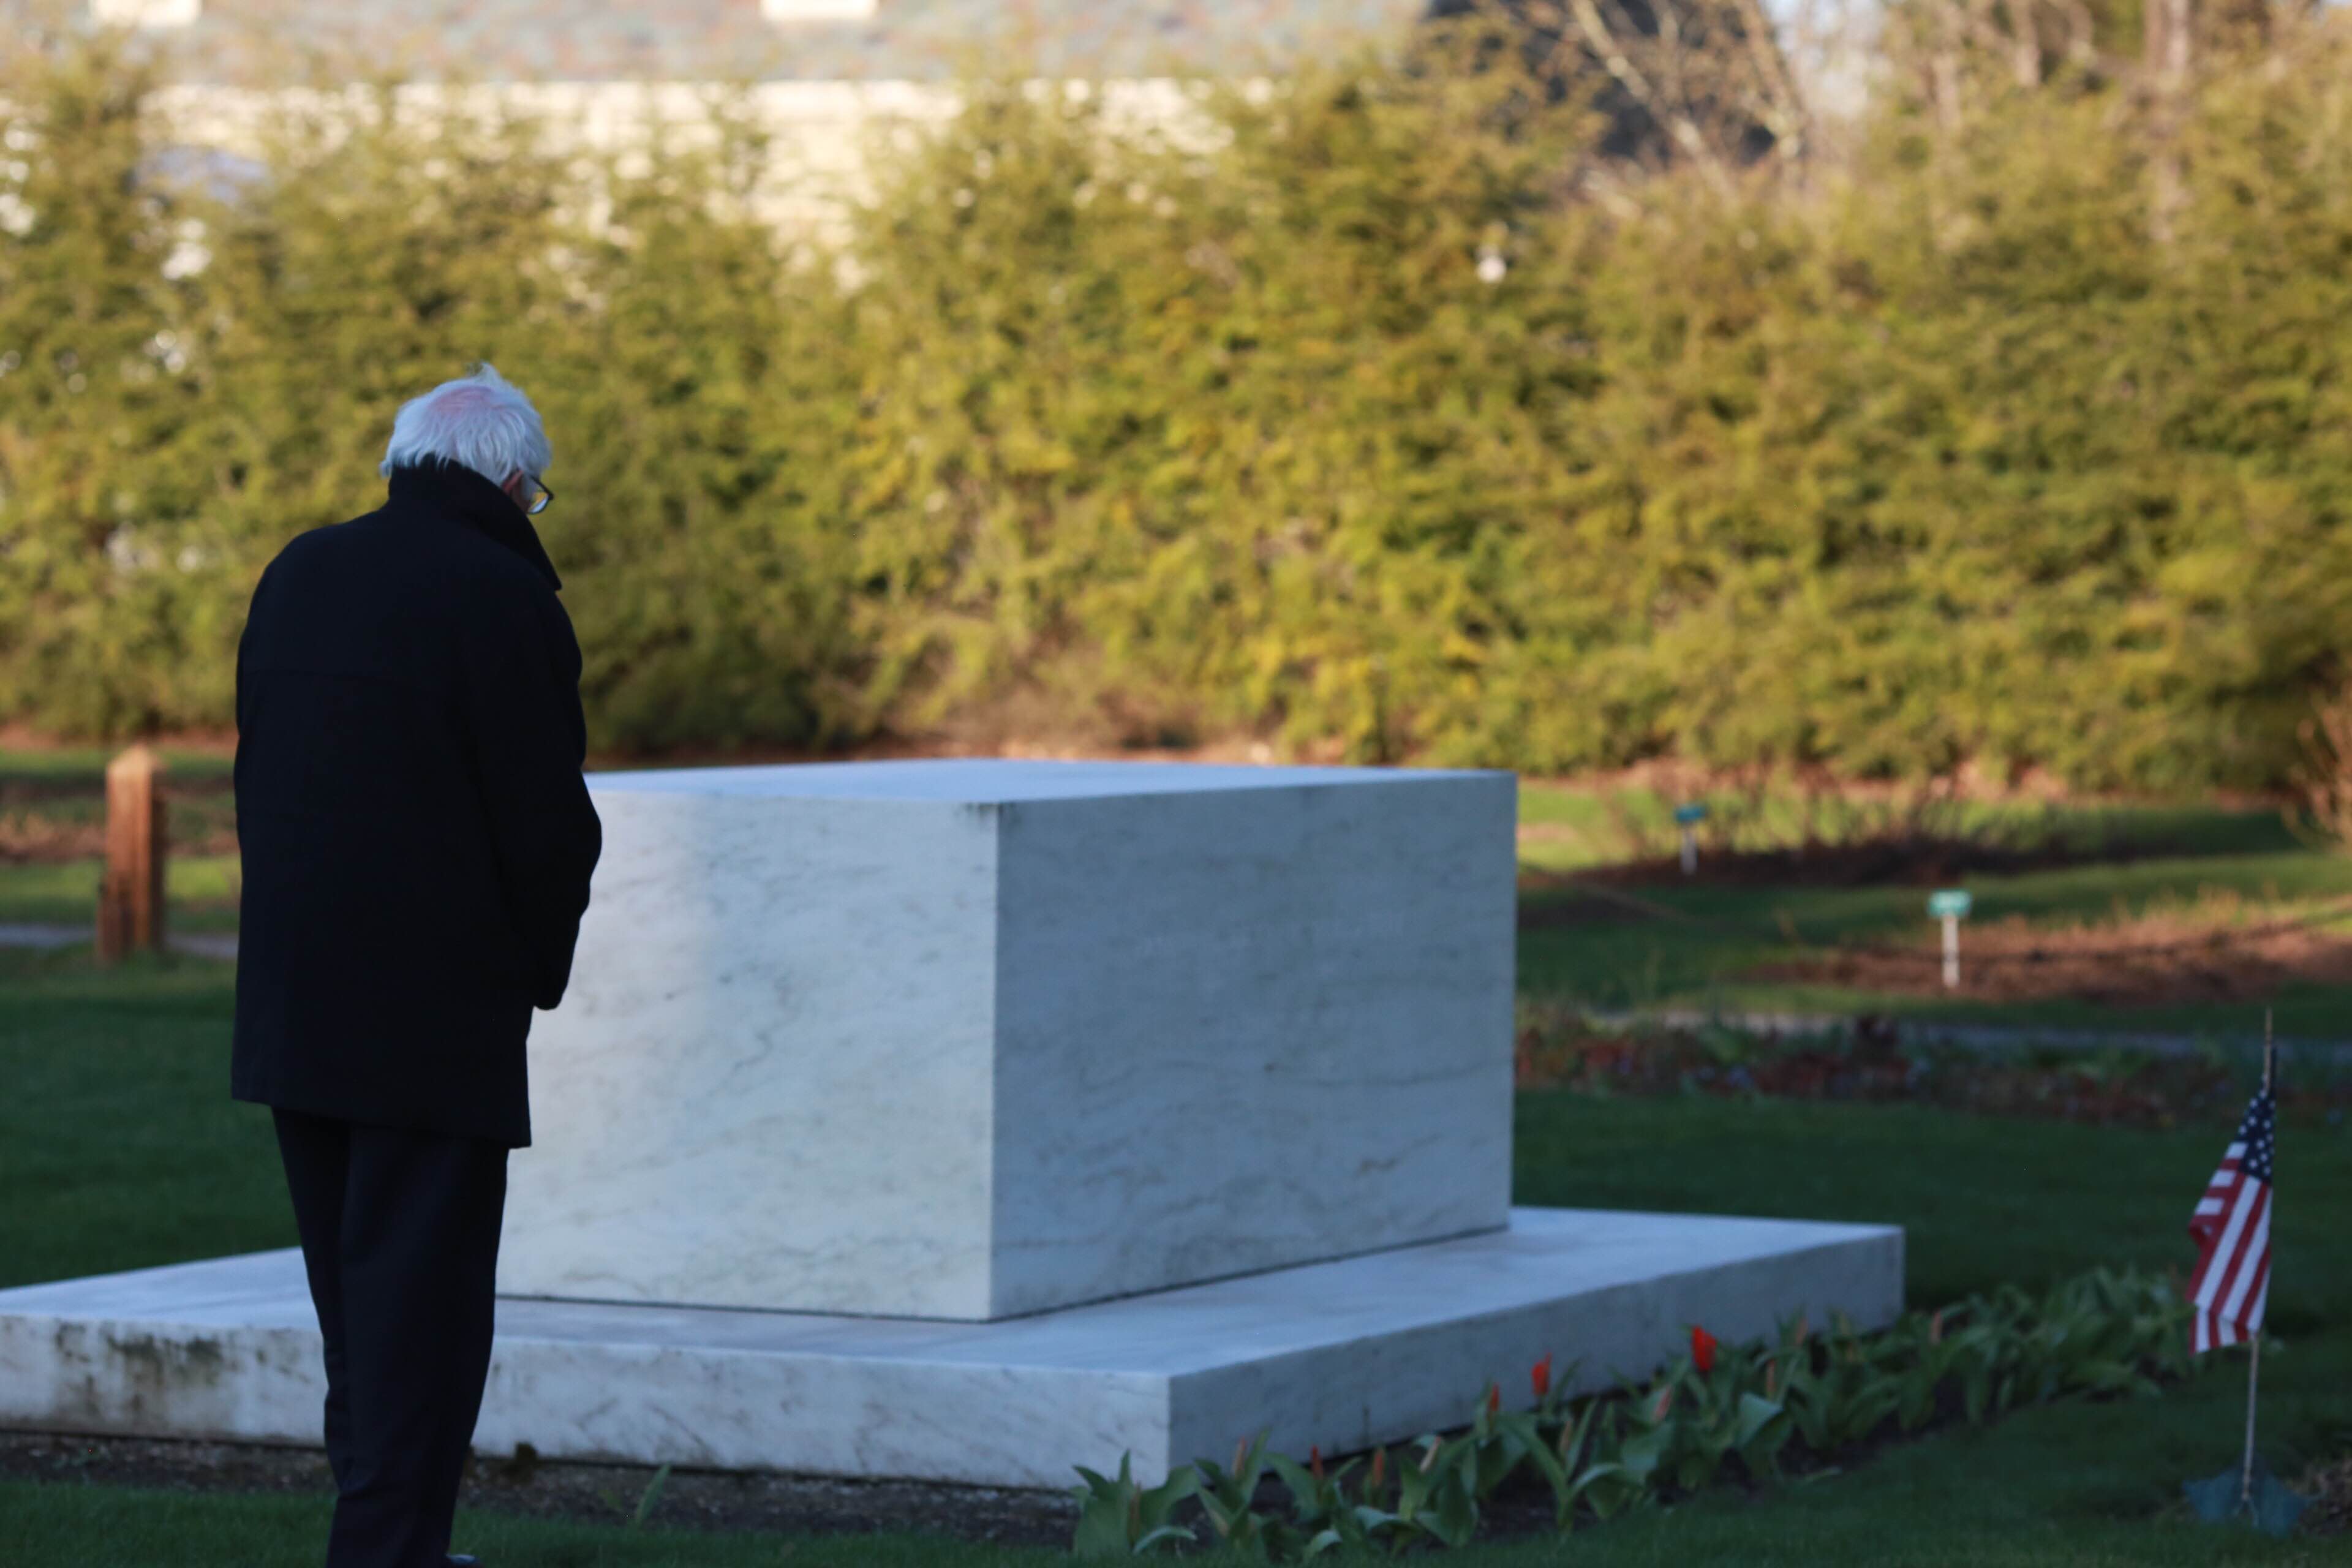 Sanders pays his respects at the gravesite of the longest-serving president in American history.